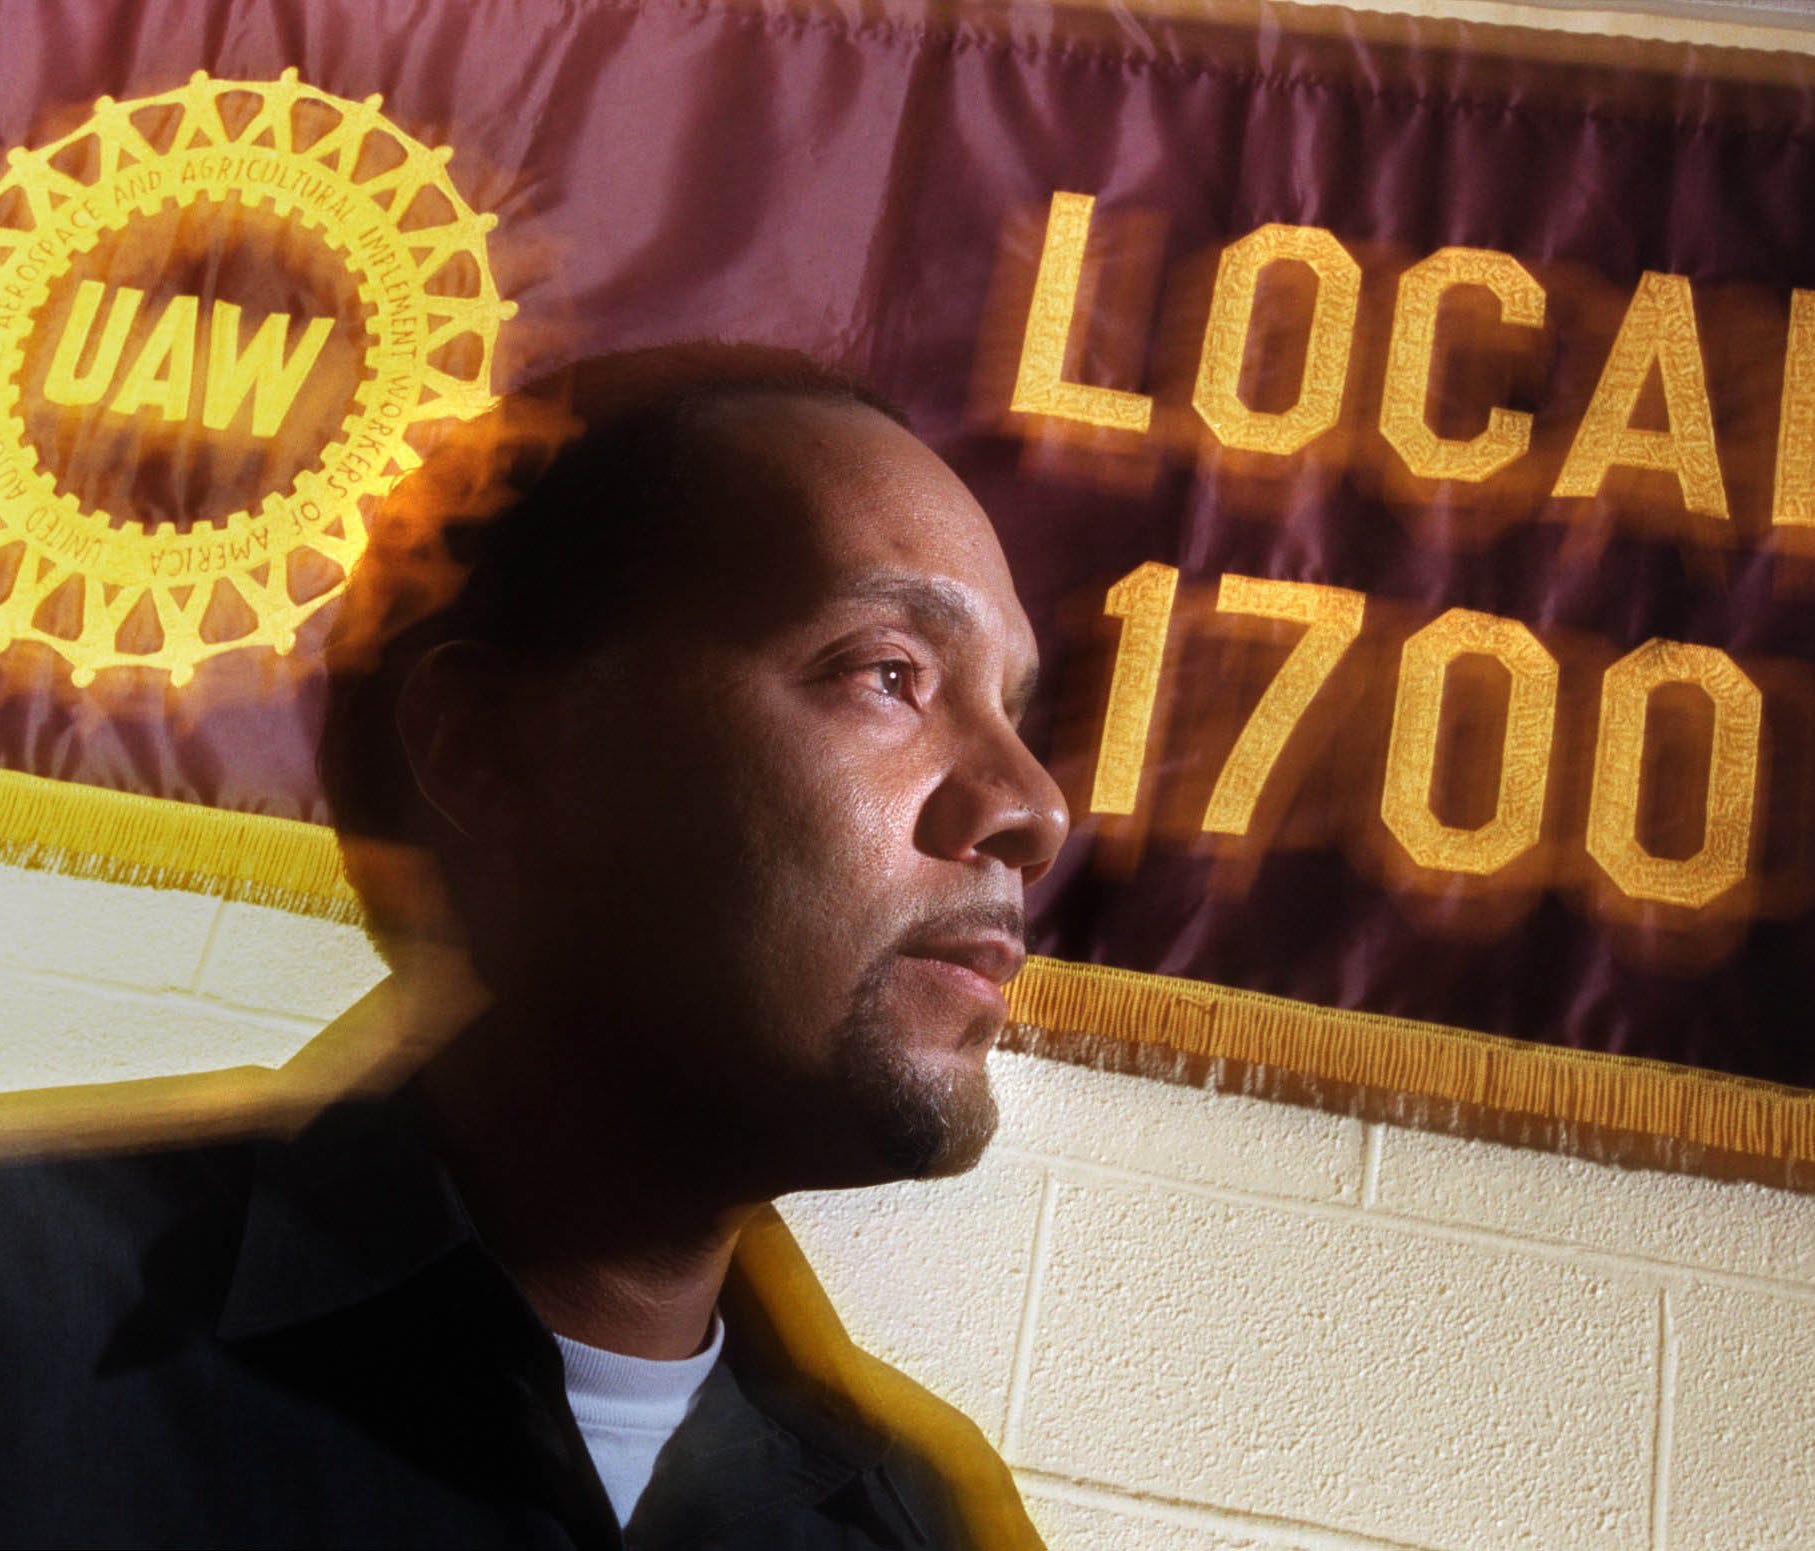 In April 2001, Keith Mickens, the vice-president of the United Auto Workers Union Local 1700 of Detroit, is preparing for the Labor Notes conference at Cobo Hall.